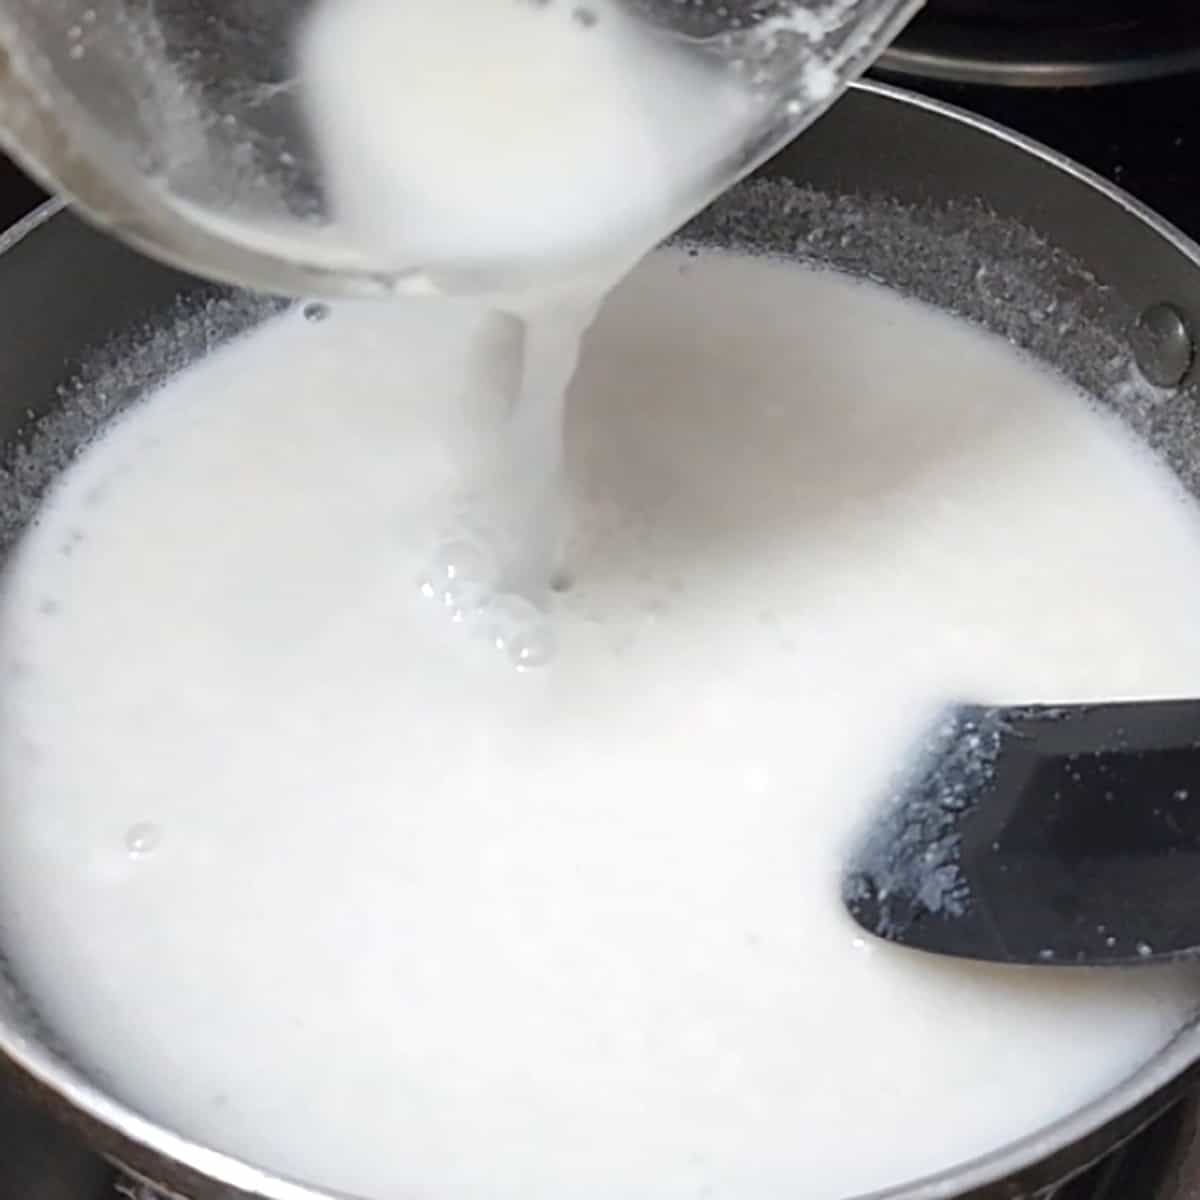 Add rice flour slurry to the pan containing salted coconut milk.